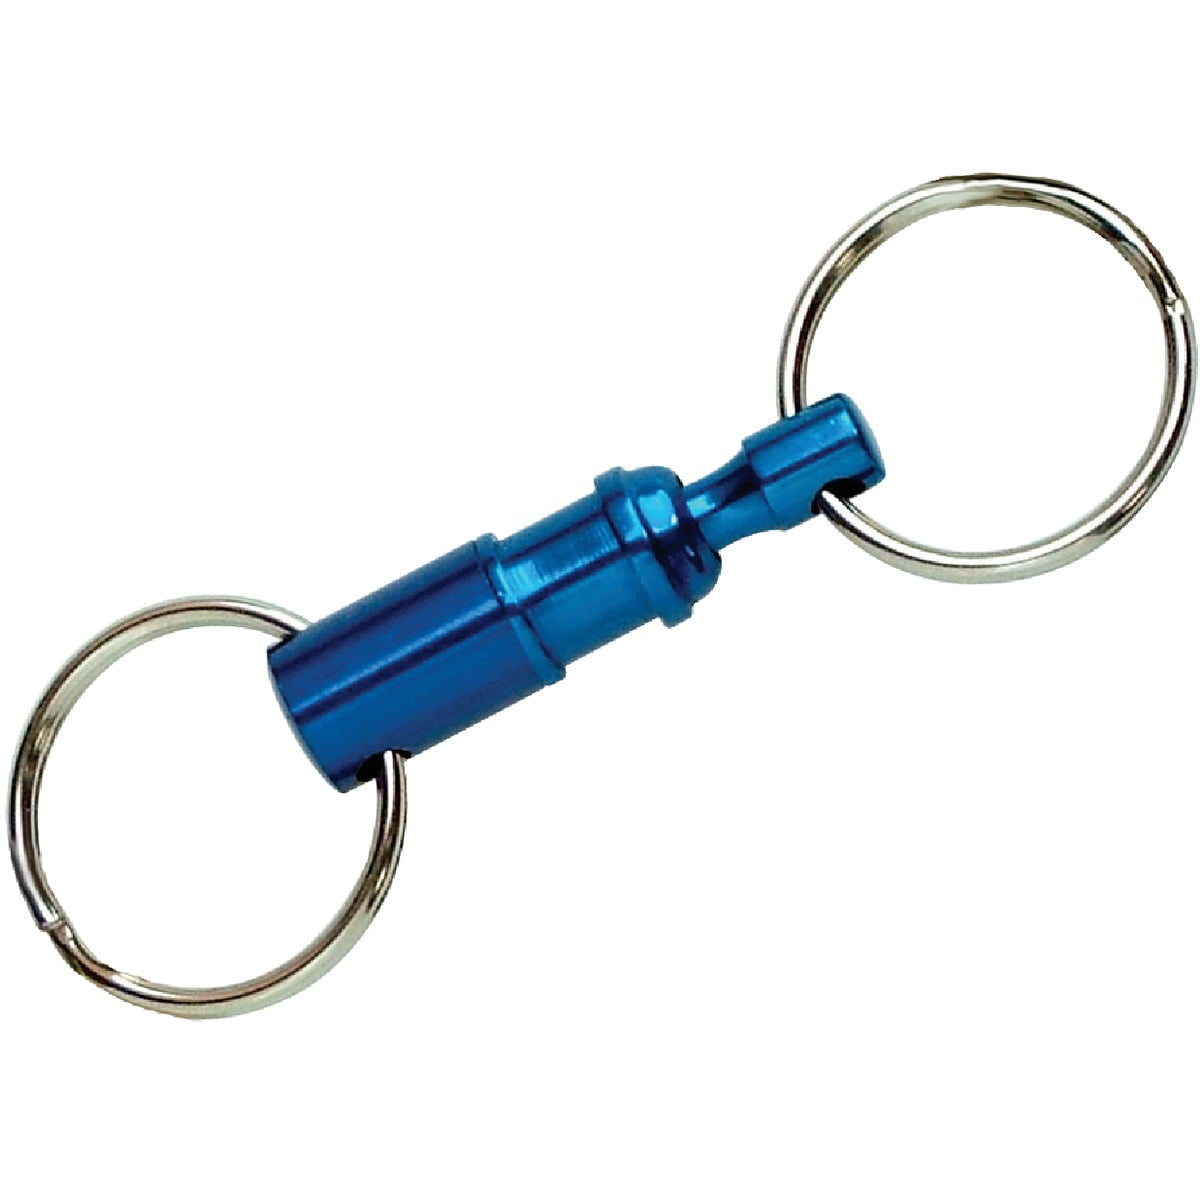 Details about   Pretty Key Rings Detachable Removable Pull Apart Quick H8T2 T9A9 Keychain S3X9 